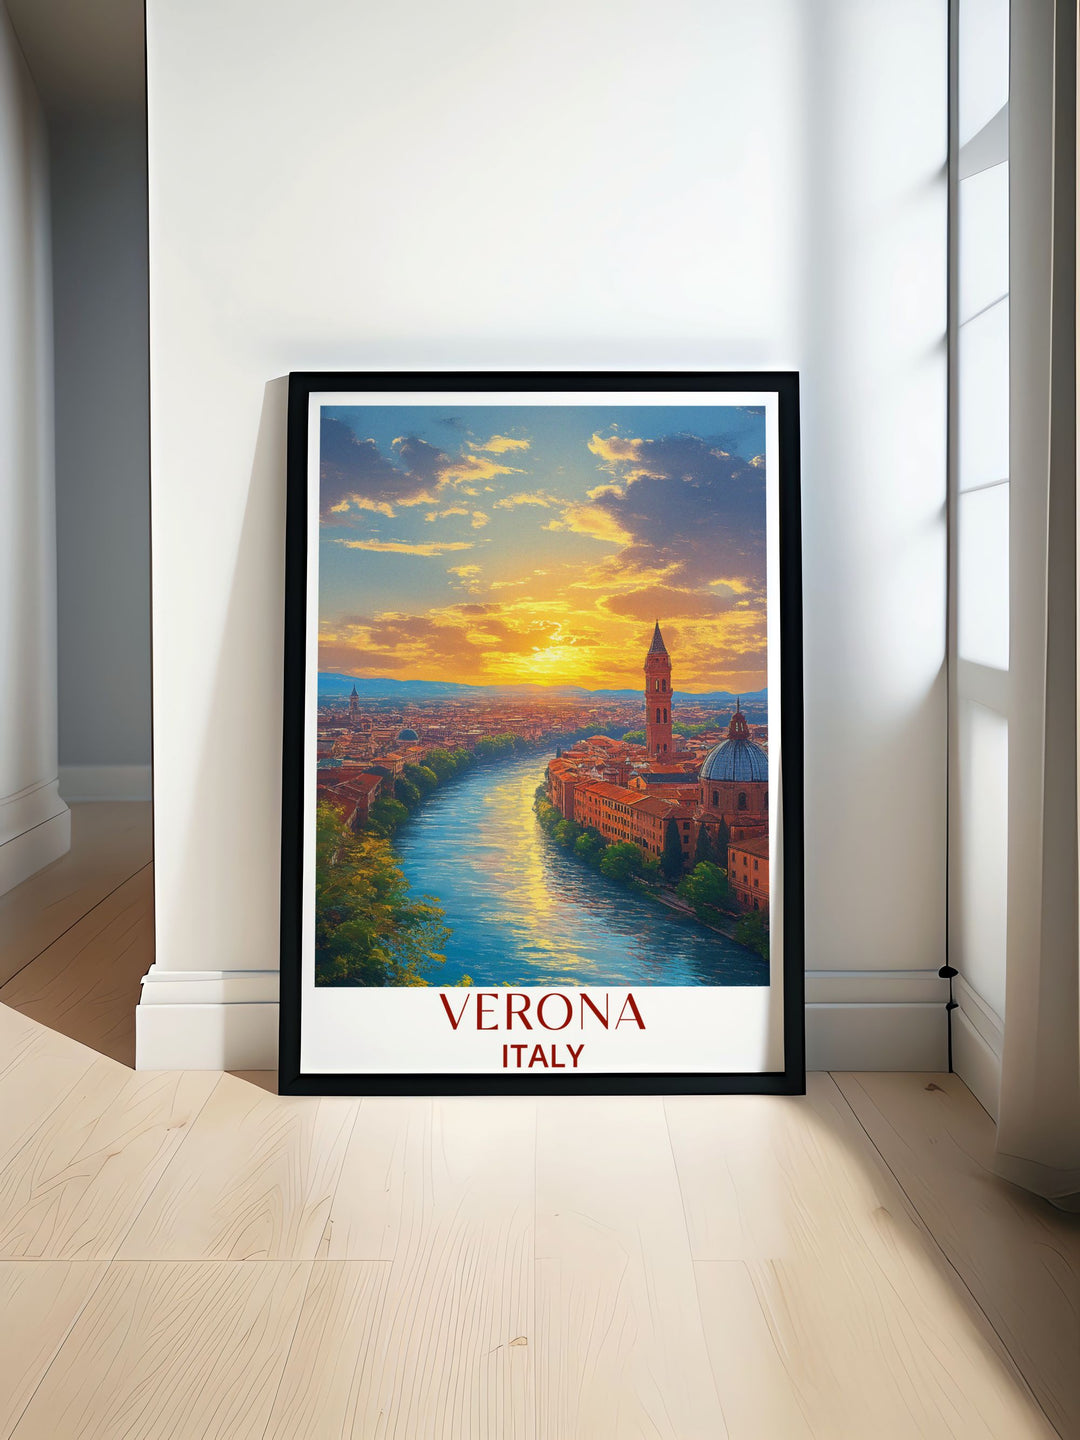 Celebrate the romance and history of Verona with this vibrant art print. The intricate details and bold colors bring the citys iconic landmarks and scenic views to life, making it a captivating piece for any art lover.